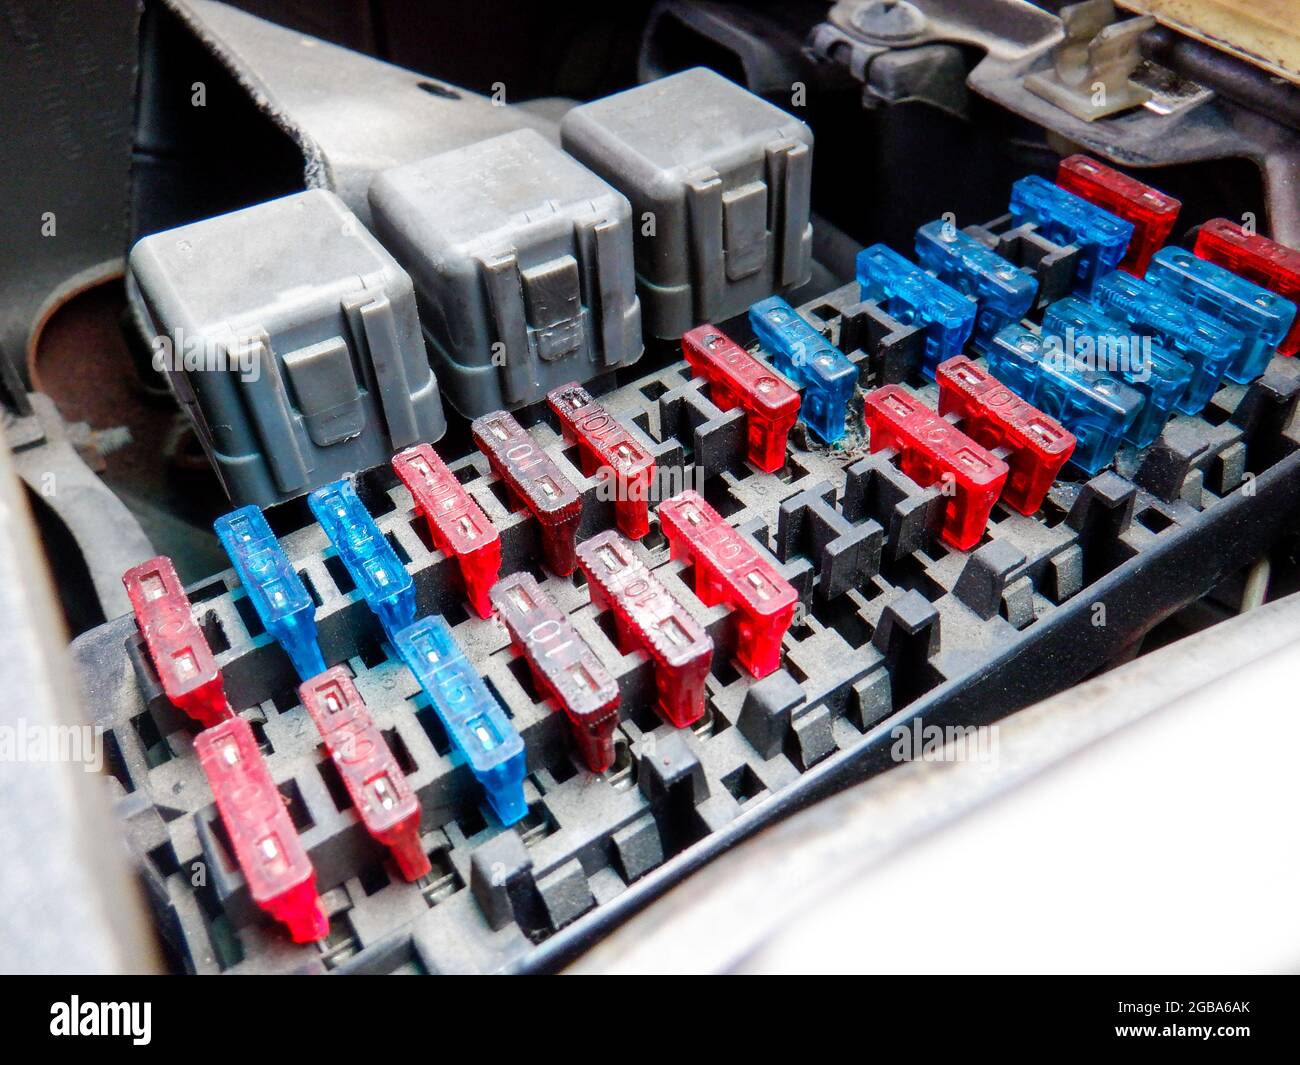 Colorful car fuse box and multiple protection fuses. Stock Photo